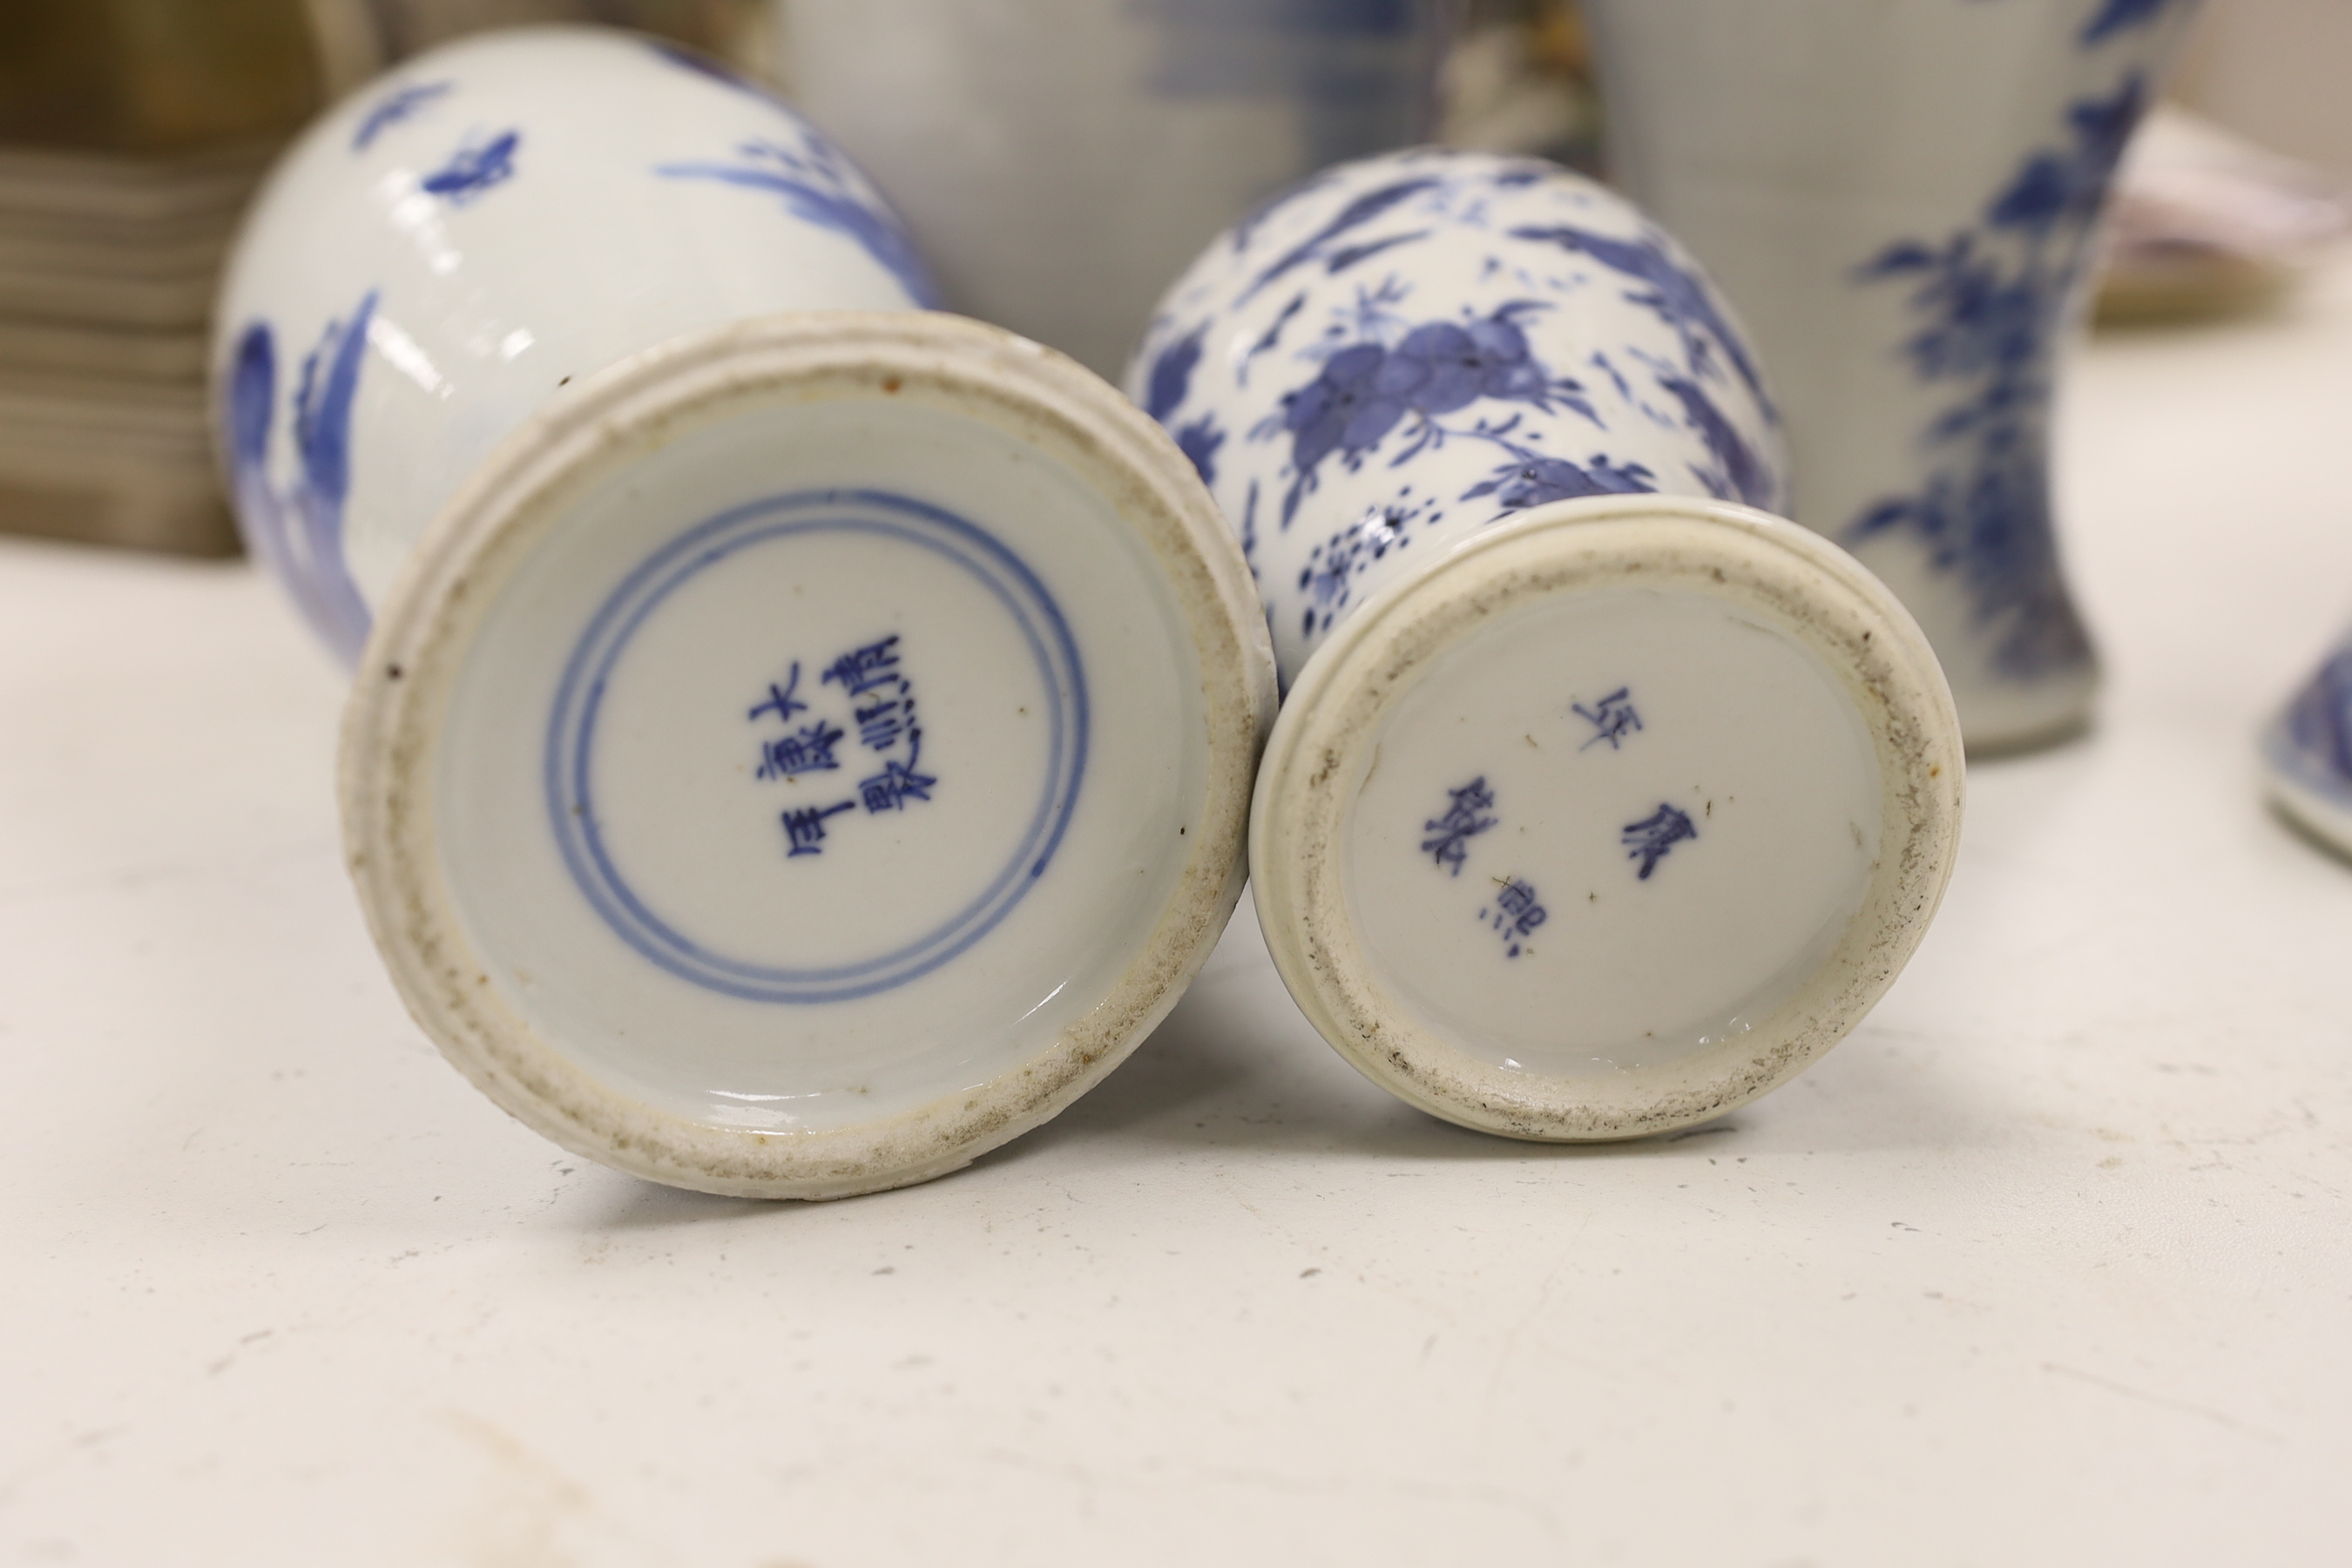 Five assorted 19th century Chinese blue and white vases, tallest 30cm high (a.f.)